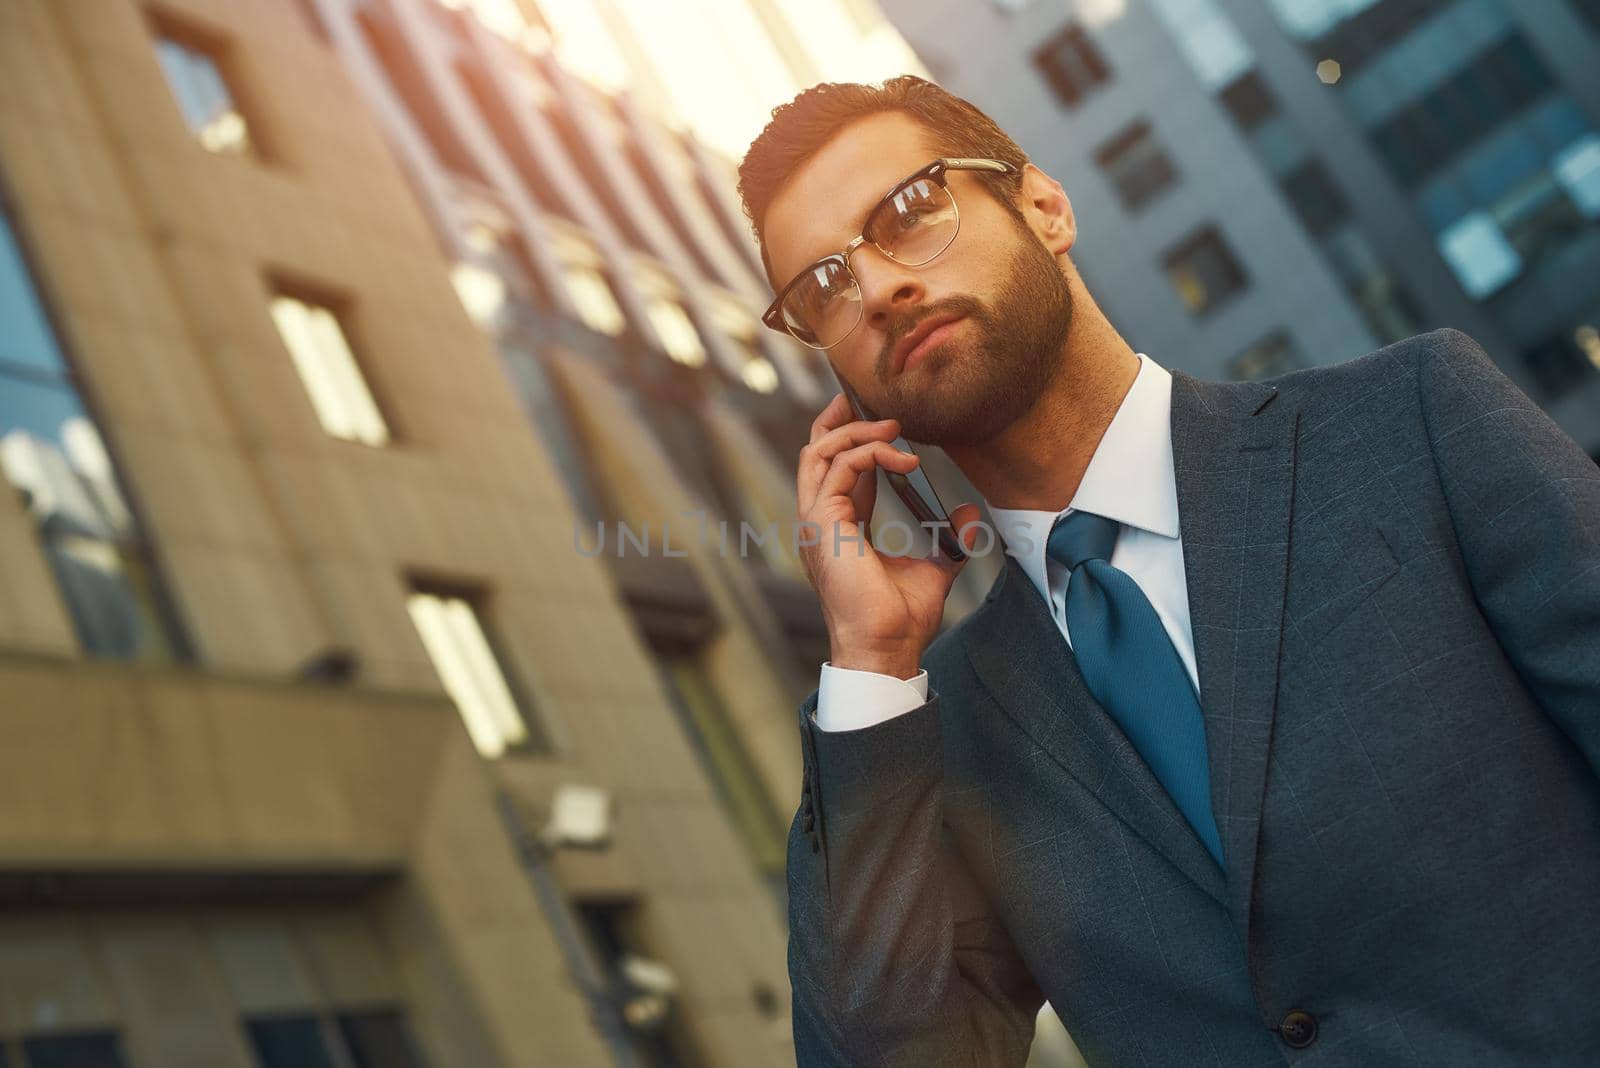 Busy day. Portrait of handsome bearded man in suit talking by phone with client while walking outdoors. Business concept